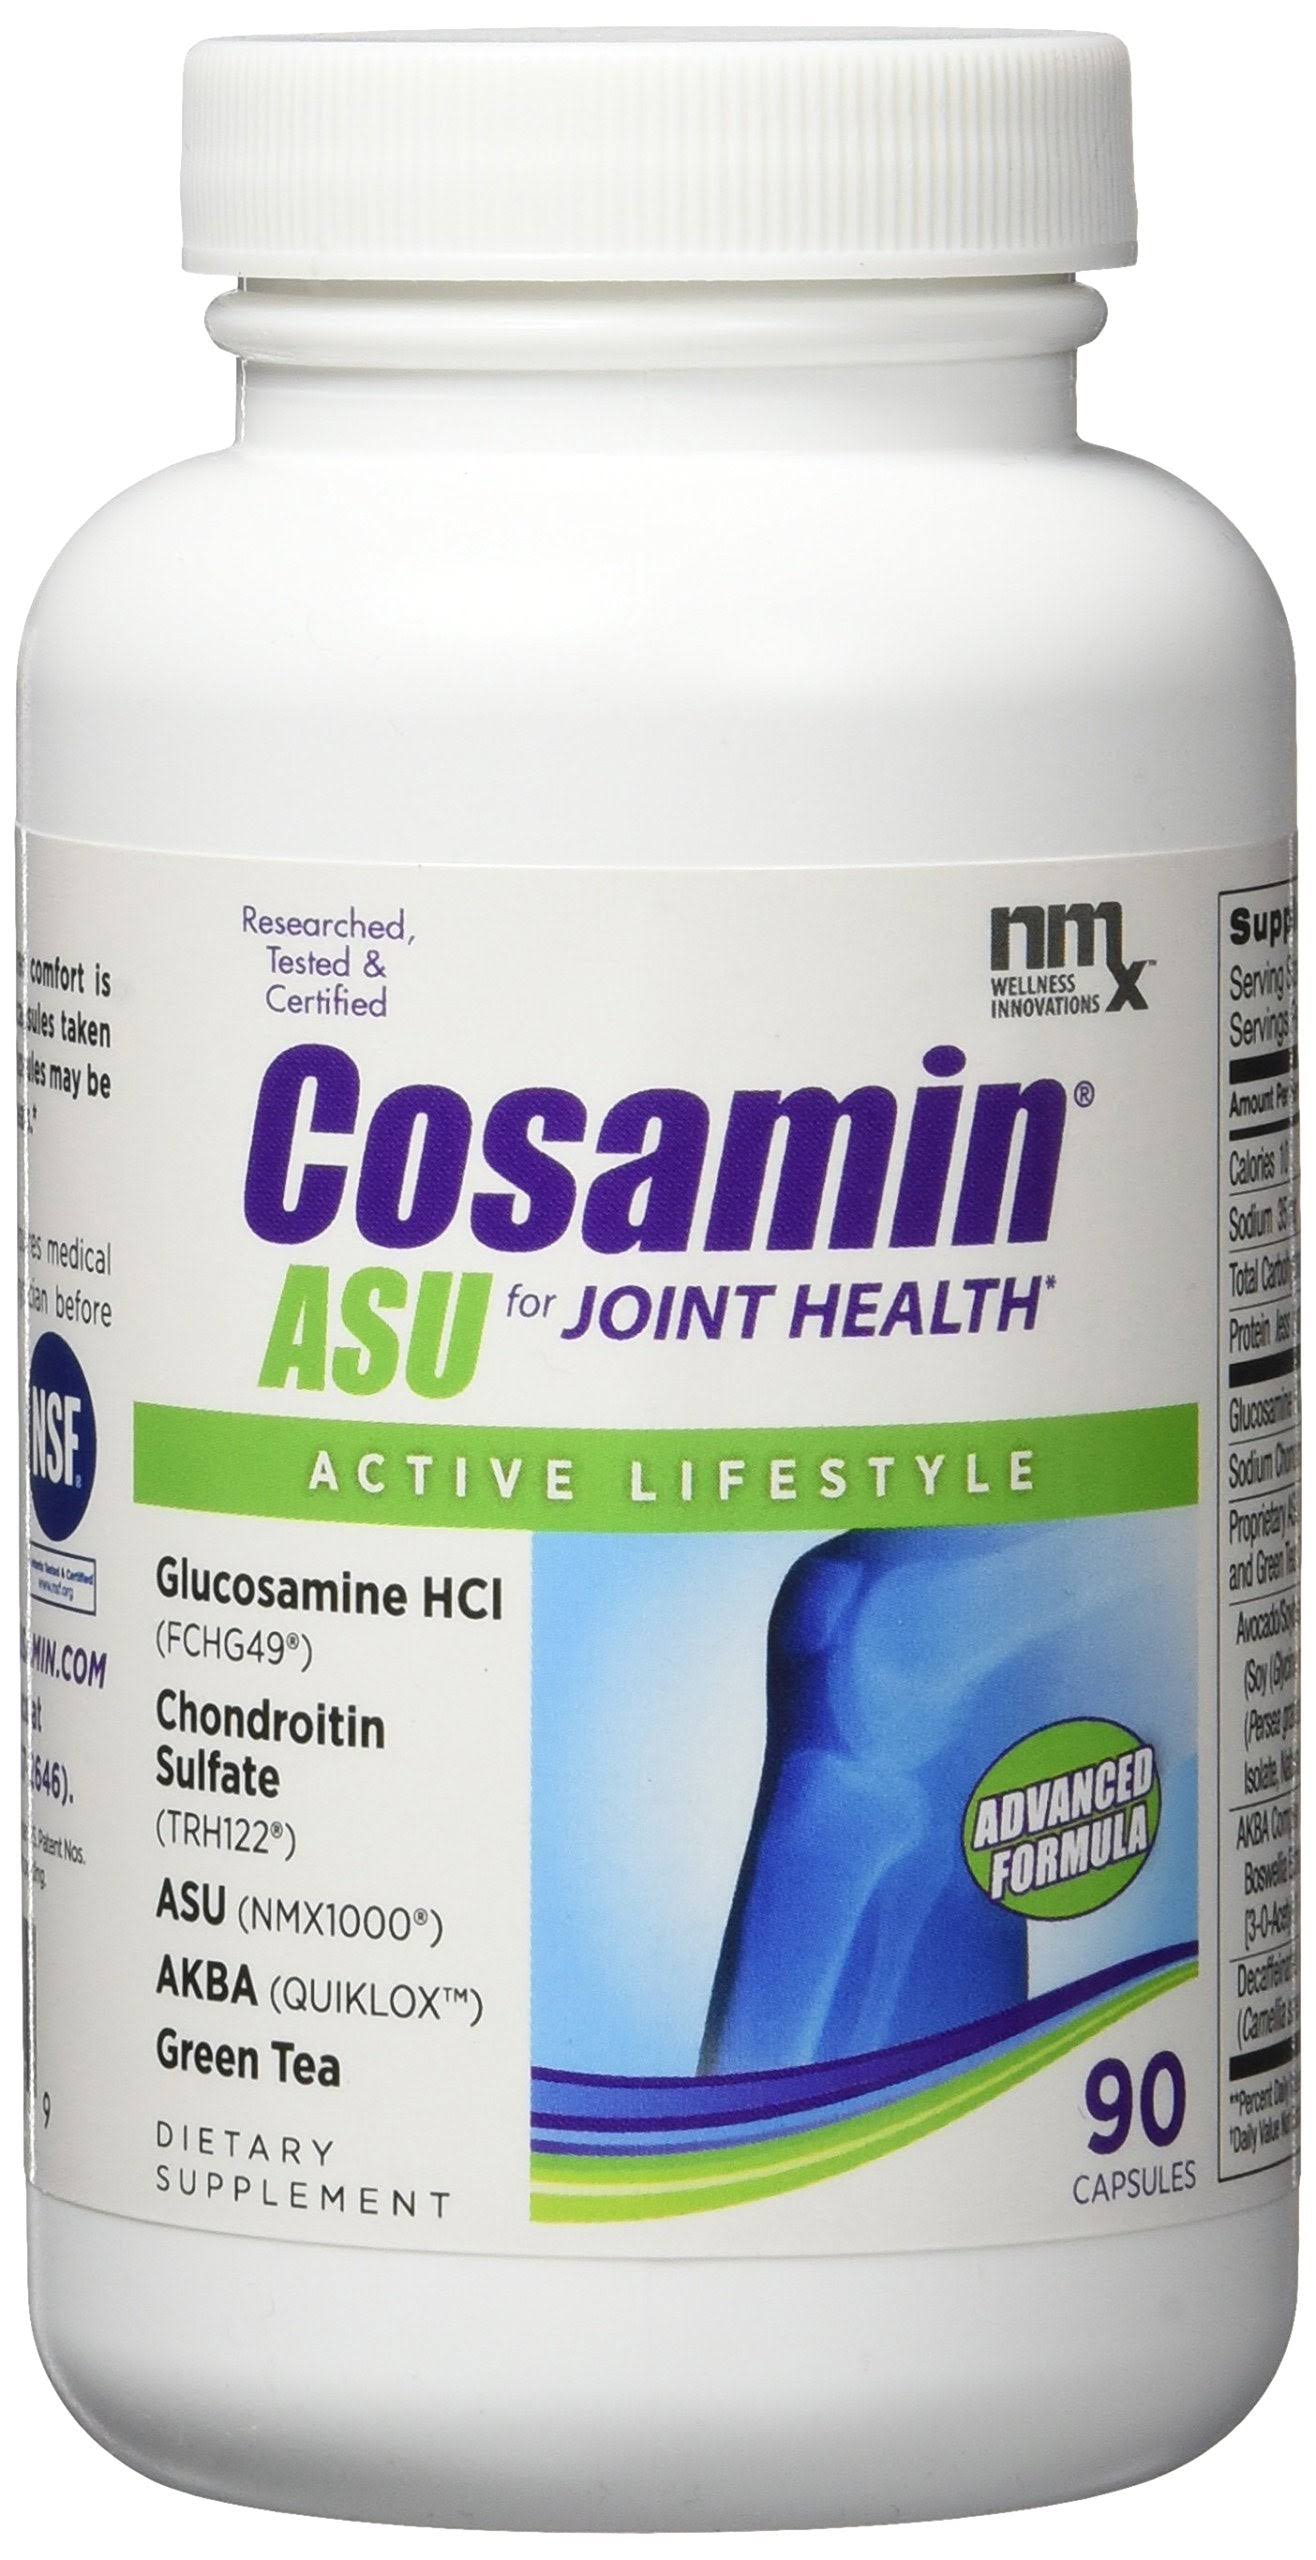 Cosamin Asu Joint Health Active Lifestyle Dietary Supplement - 90 Capsules